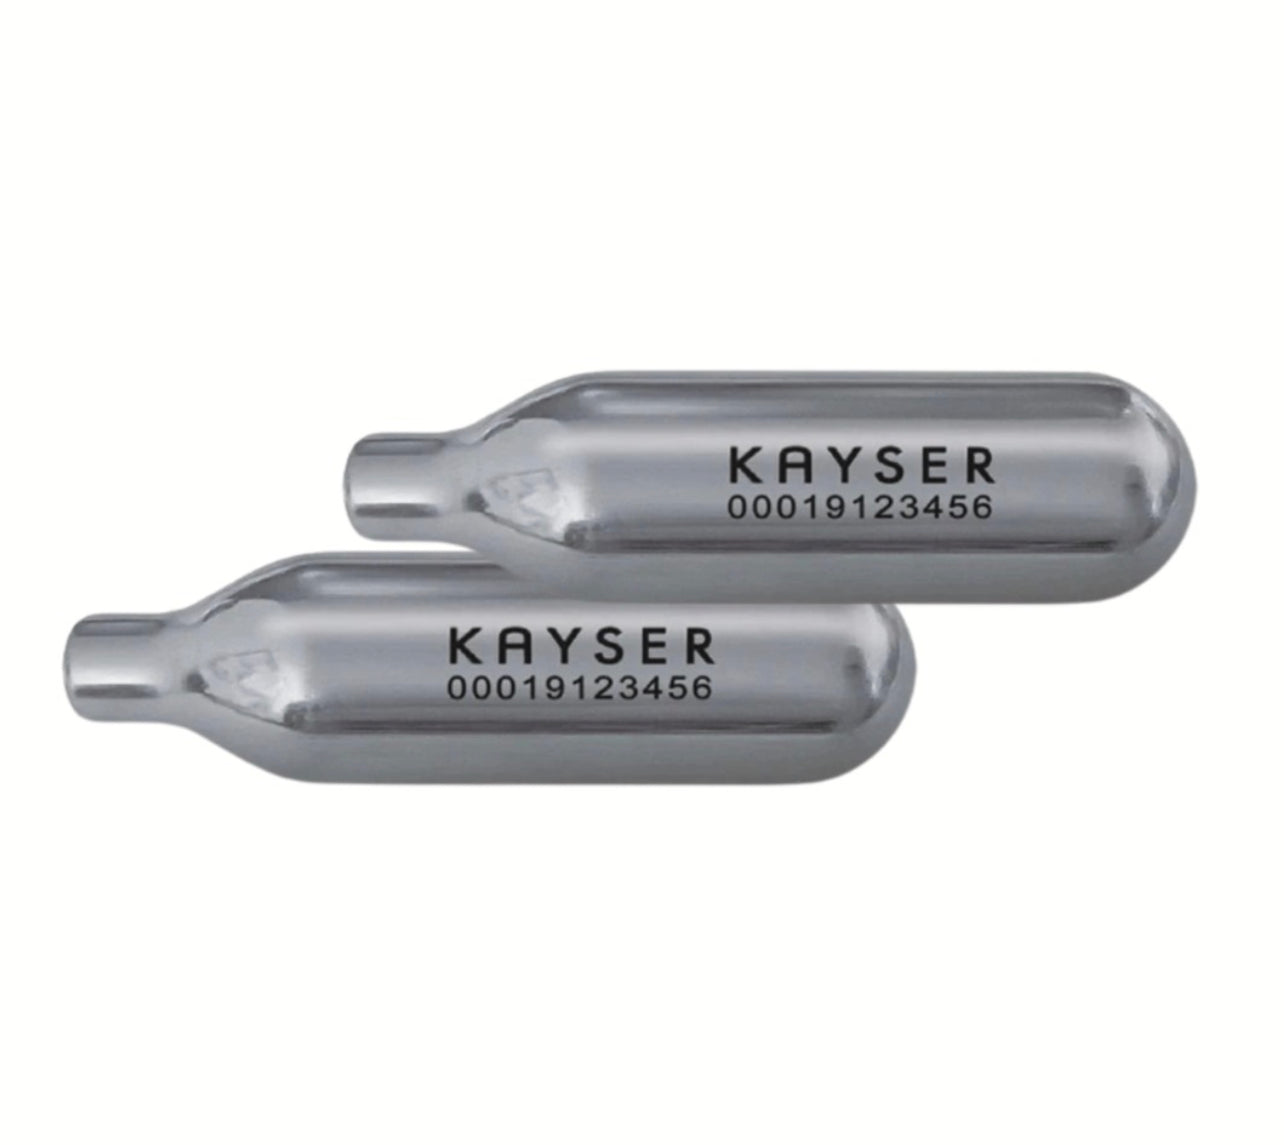 Kayser Nitrous Oxide Cream Chargers - 2pc